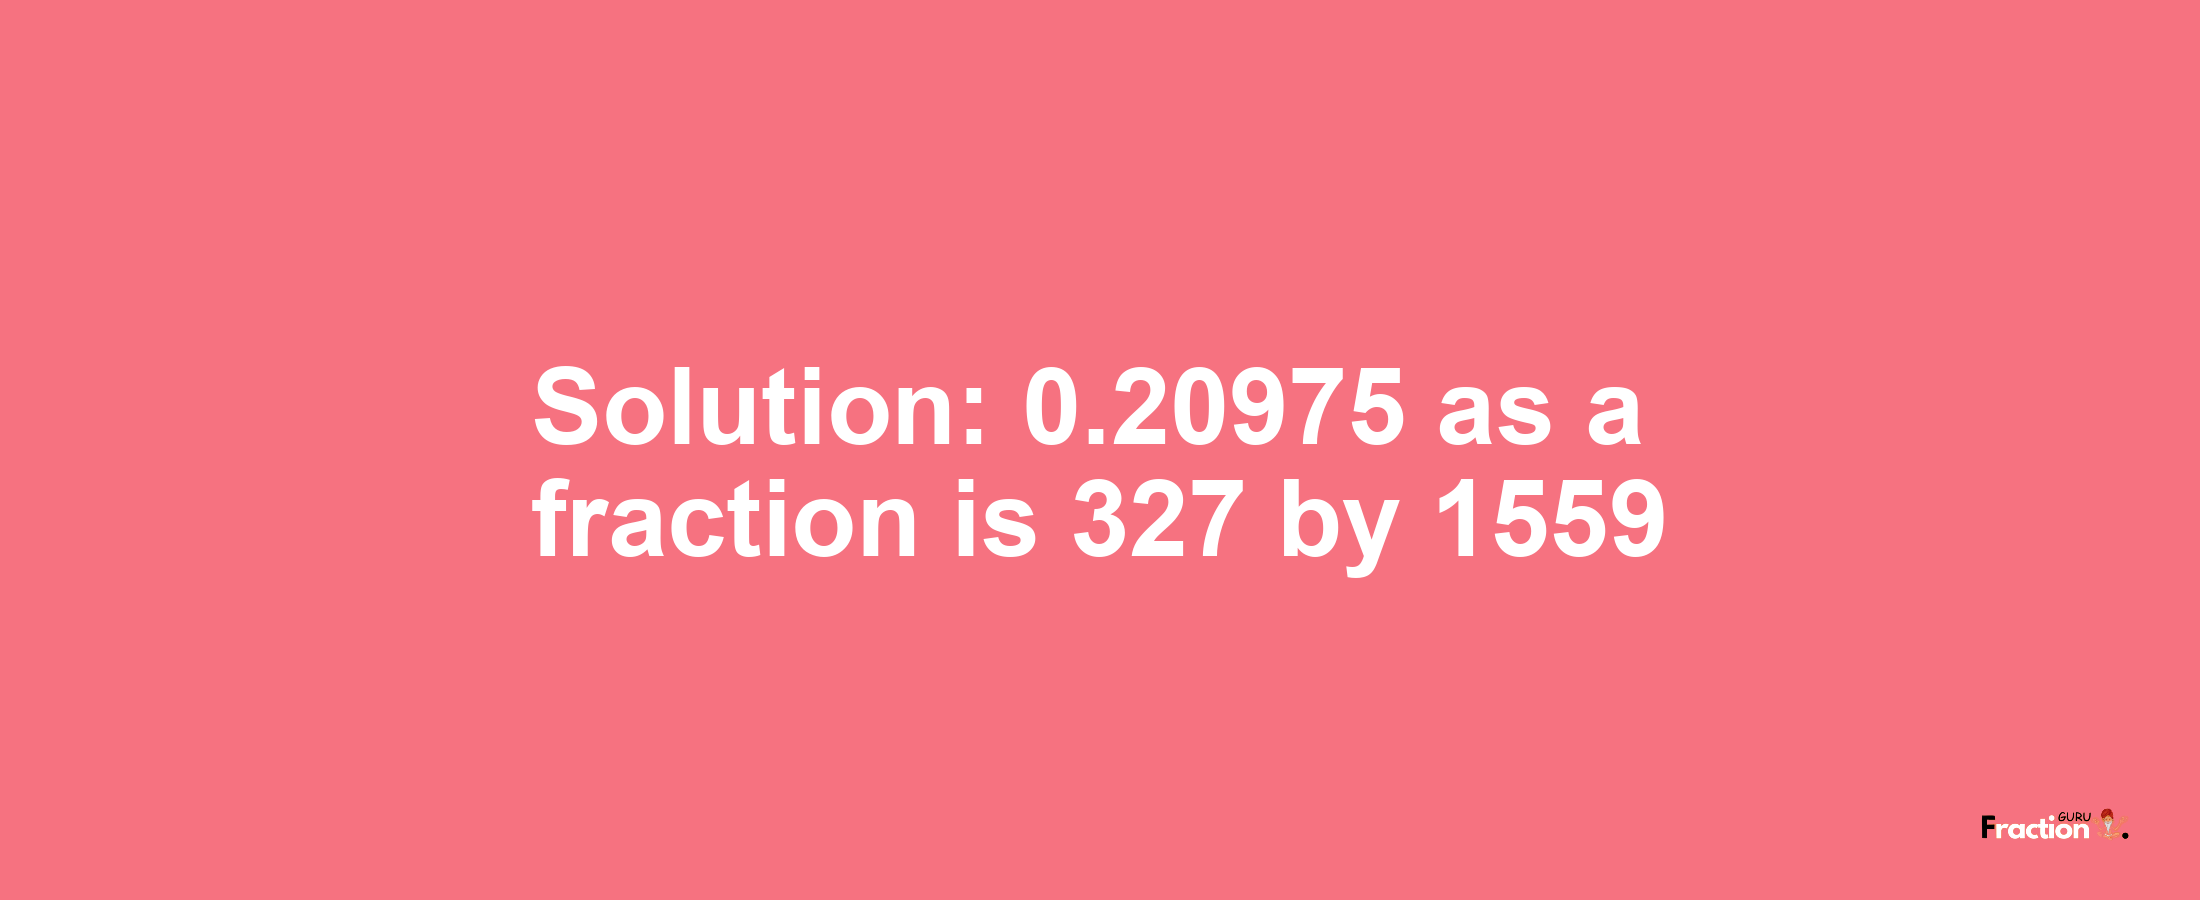 Solution:0.20975 as a fraction is 327/1559